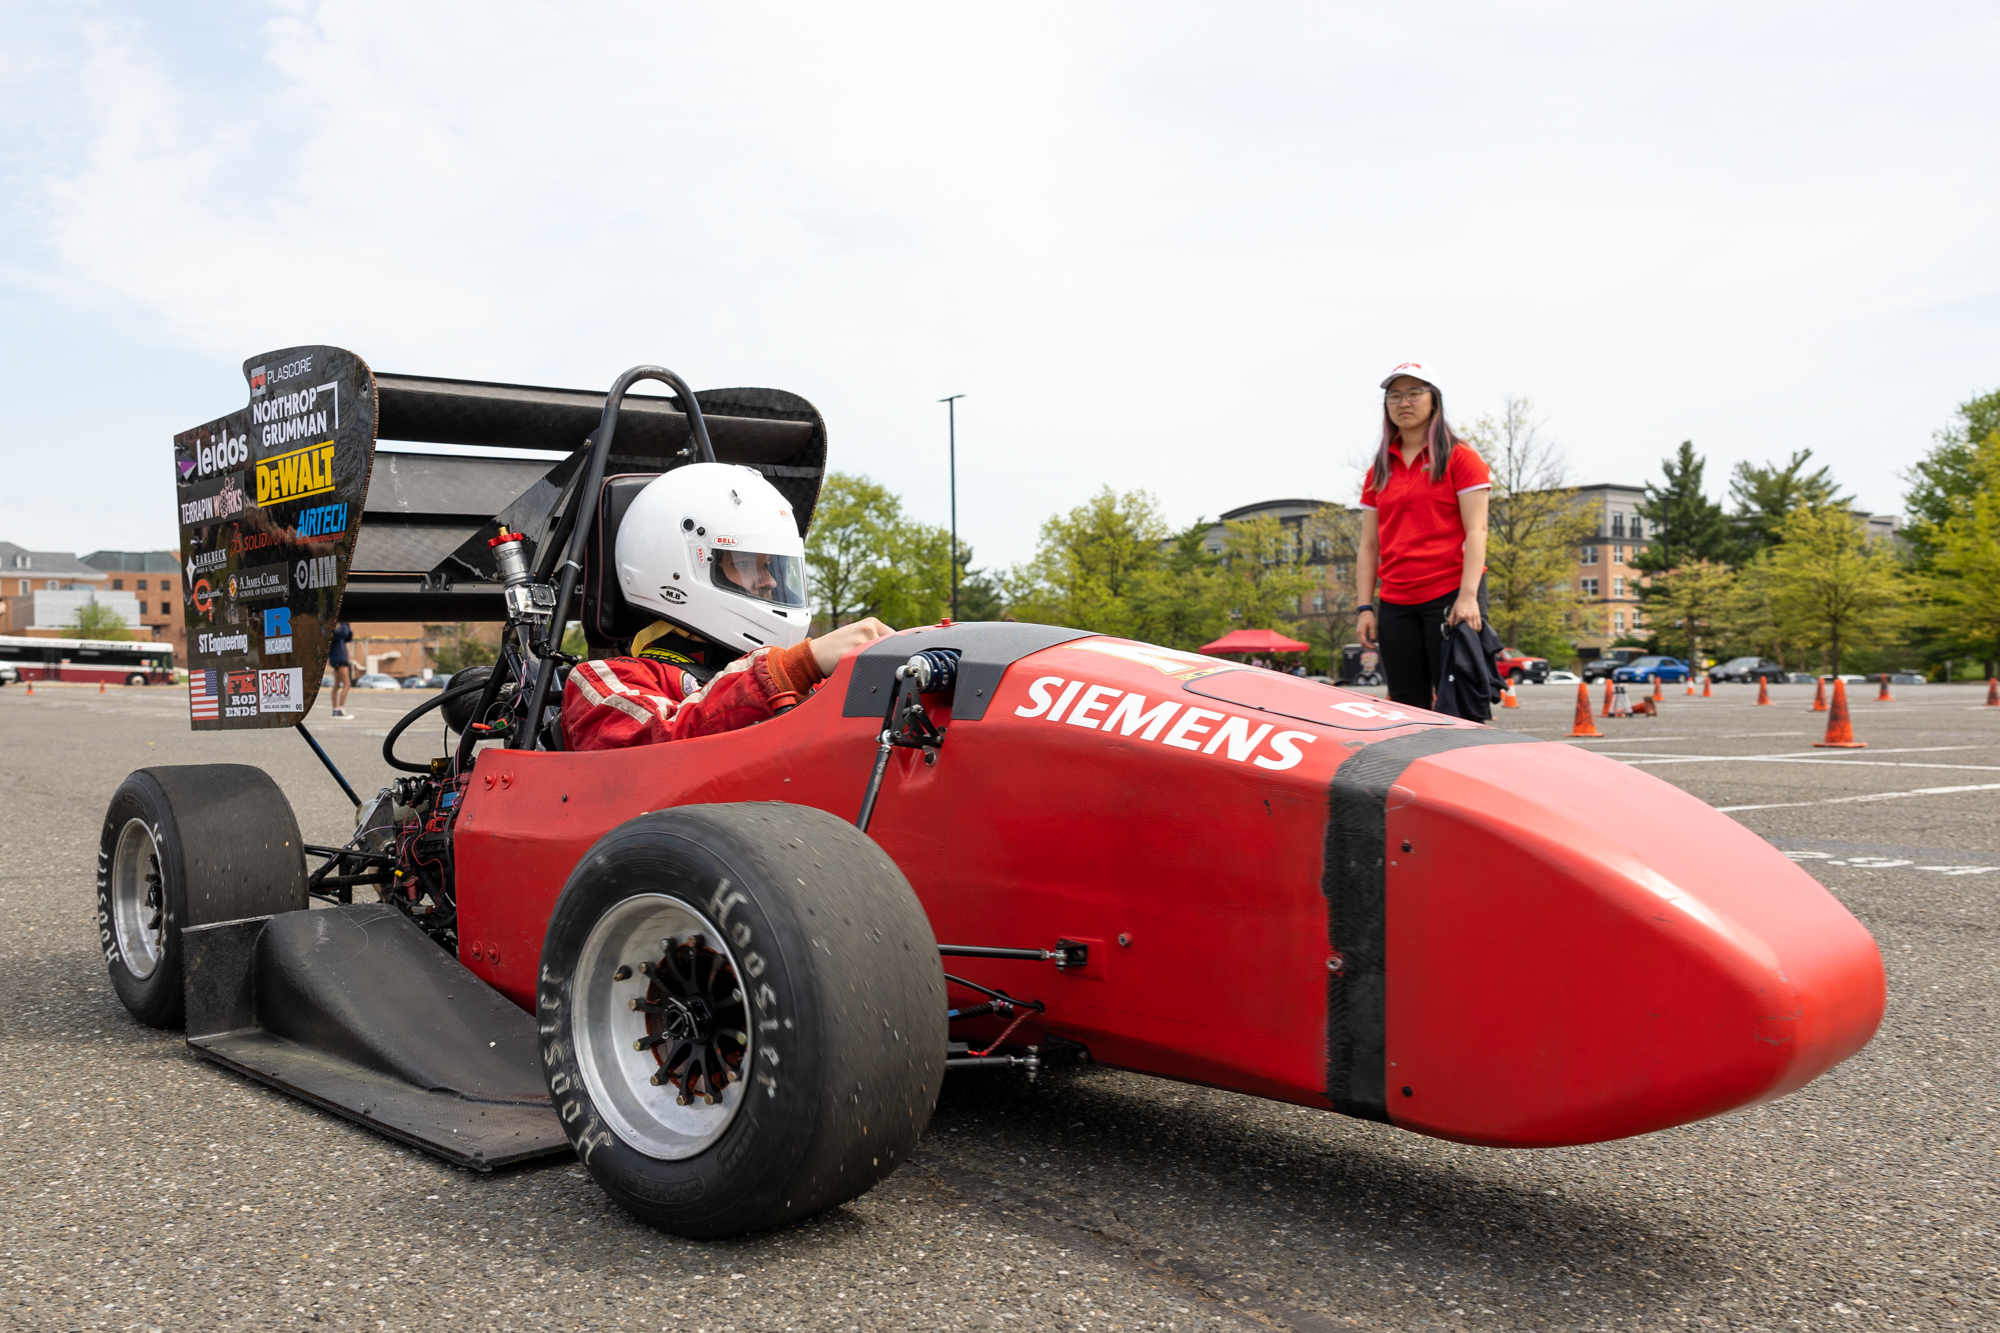 Terps Racing club members reflect on team bond, test cars before May  competition - The Diamondback